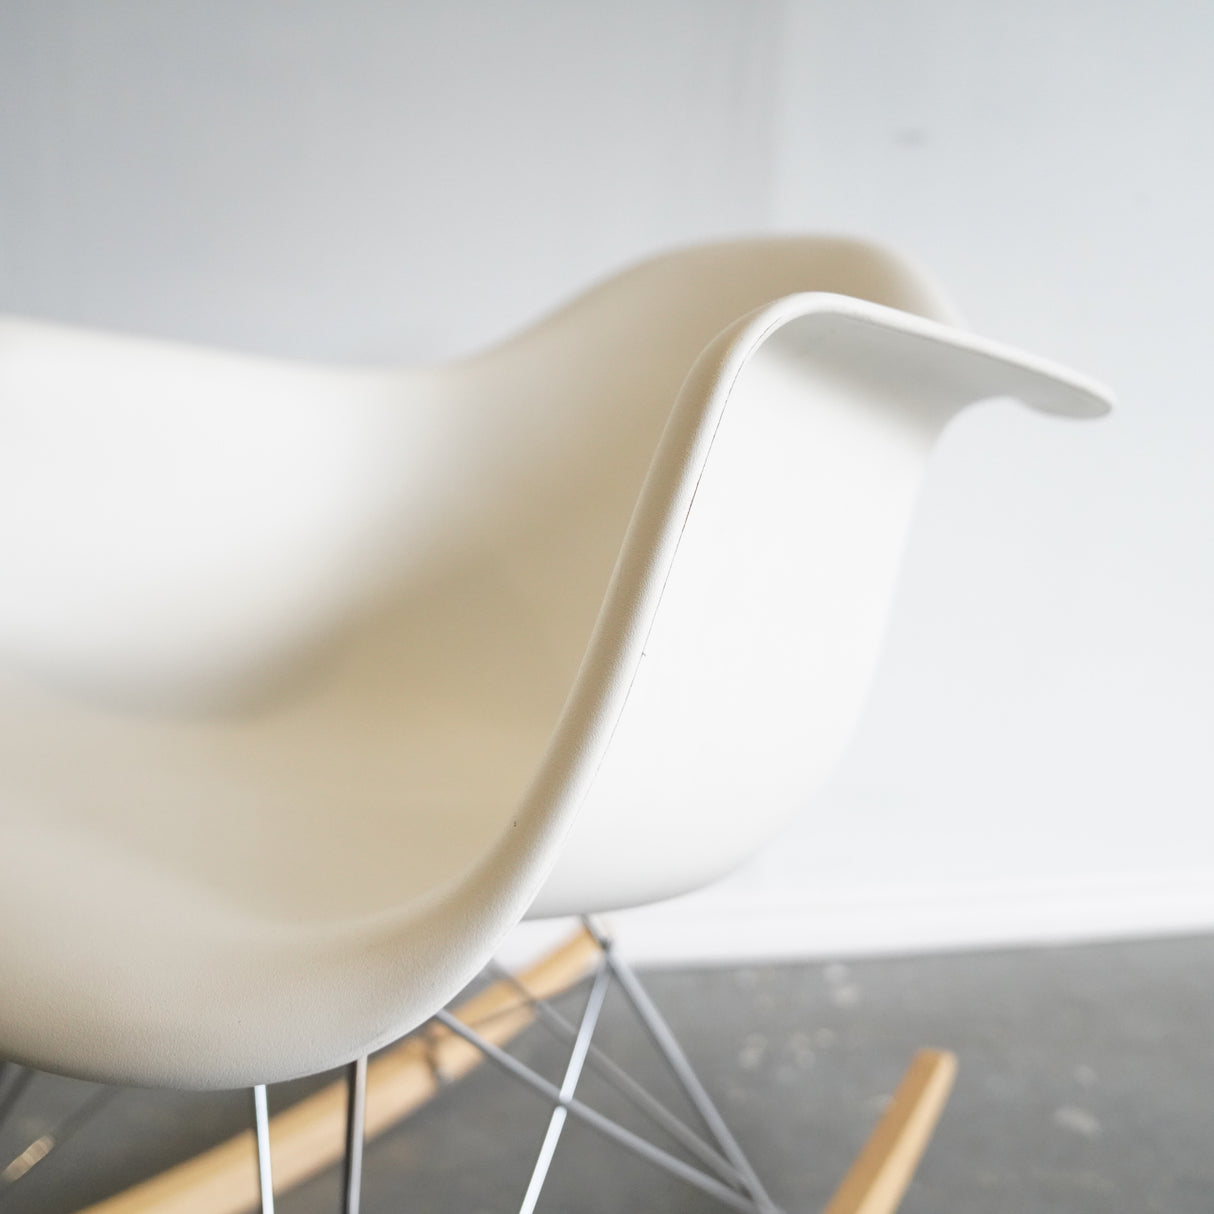 Authentic Herman Miller Eames Molded Plastic Rocking chair